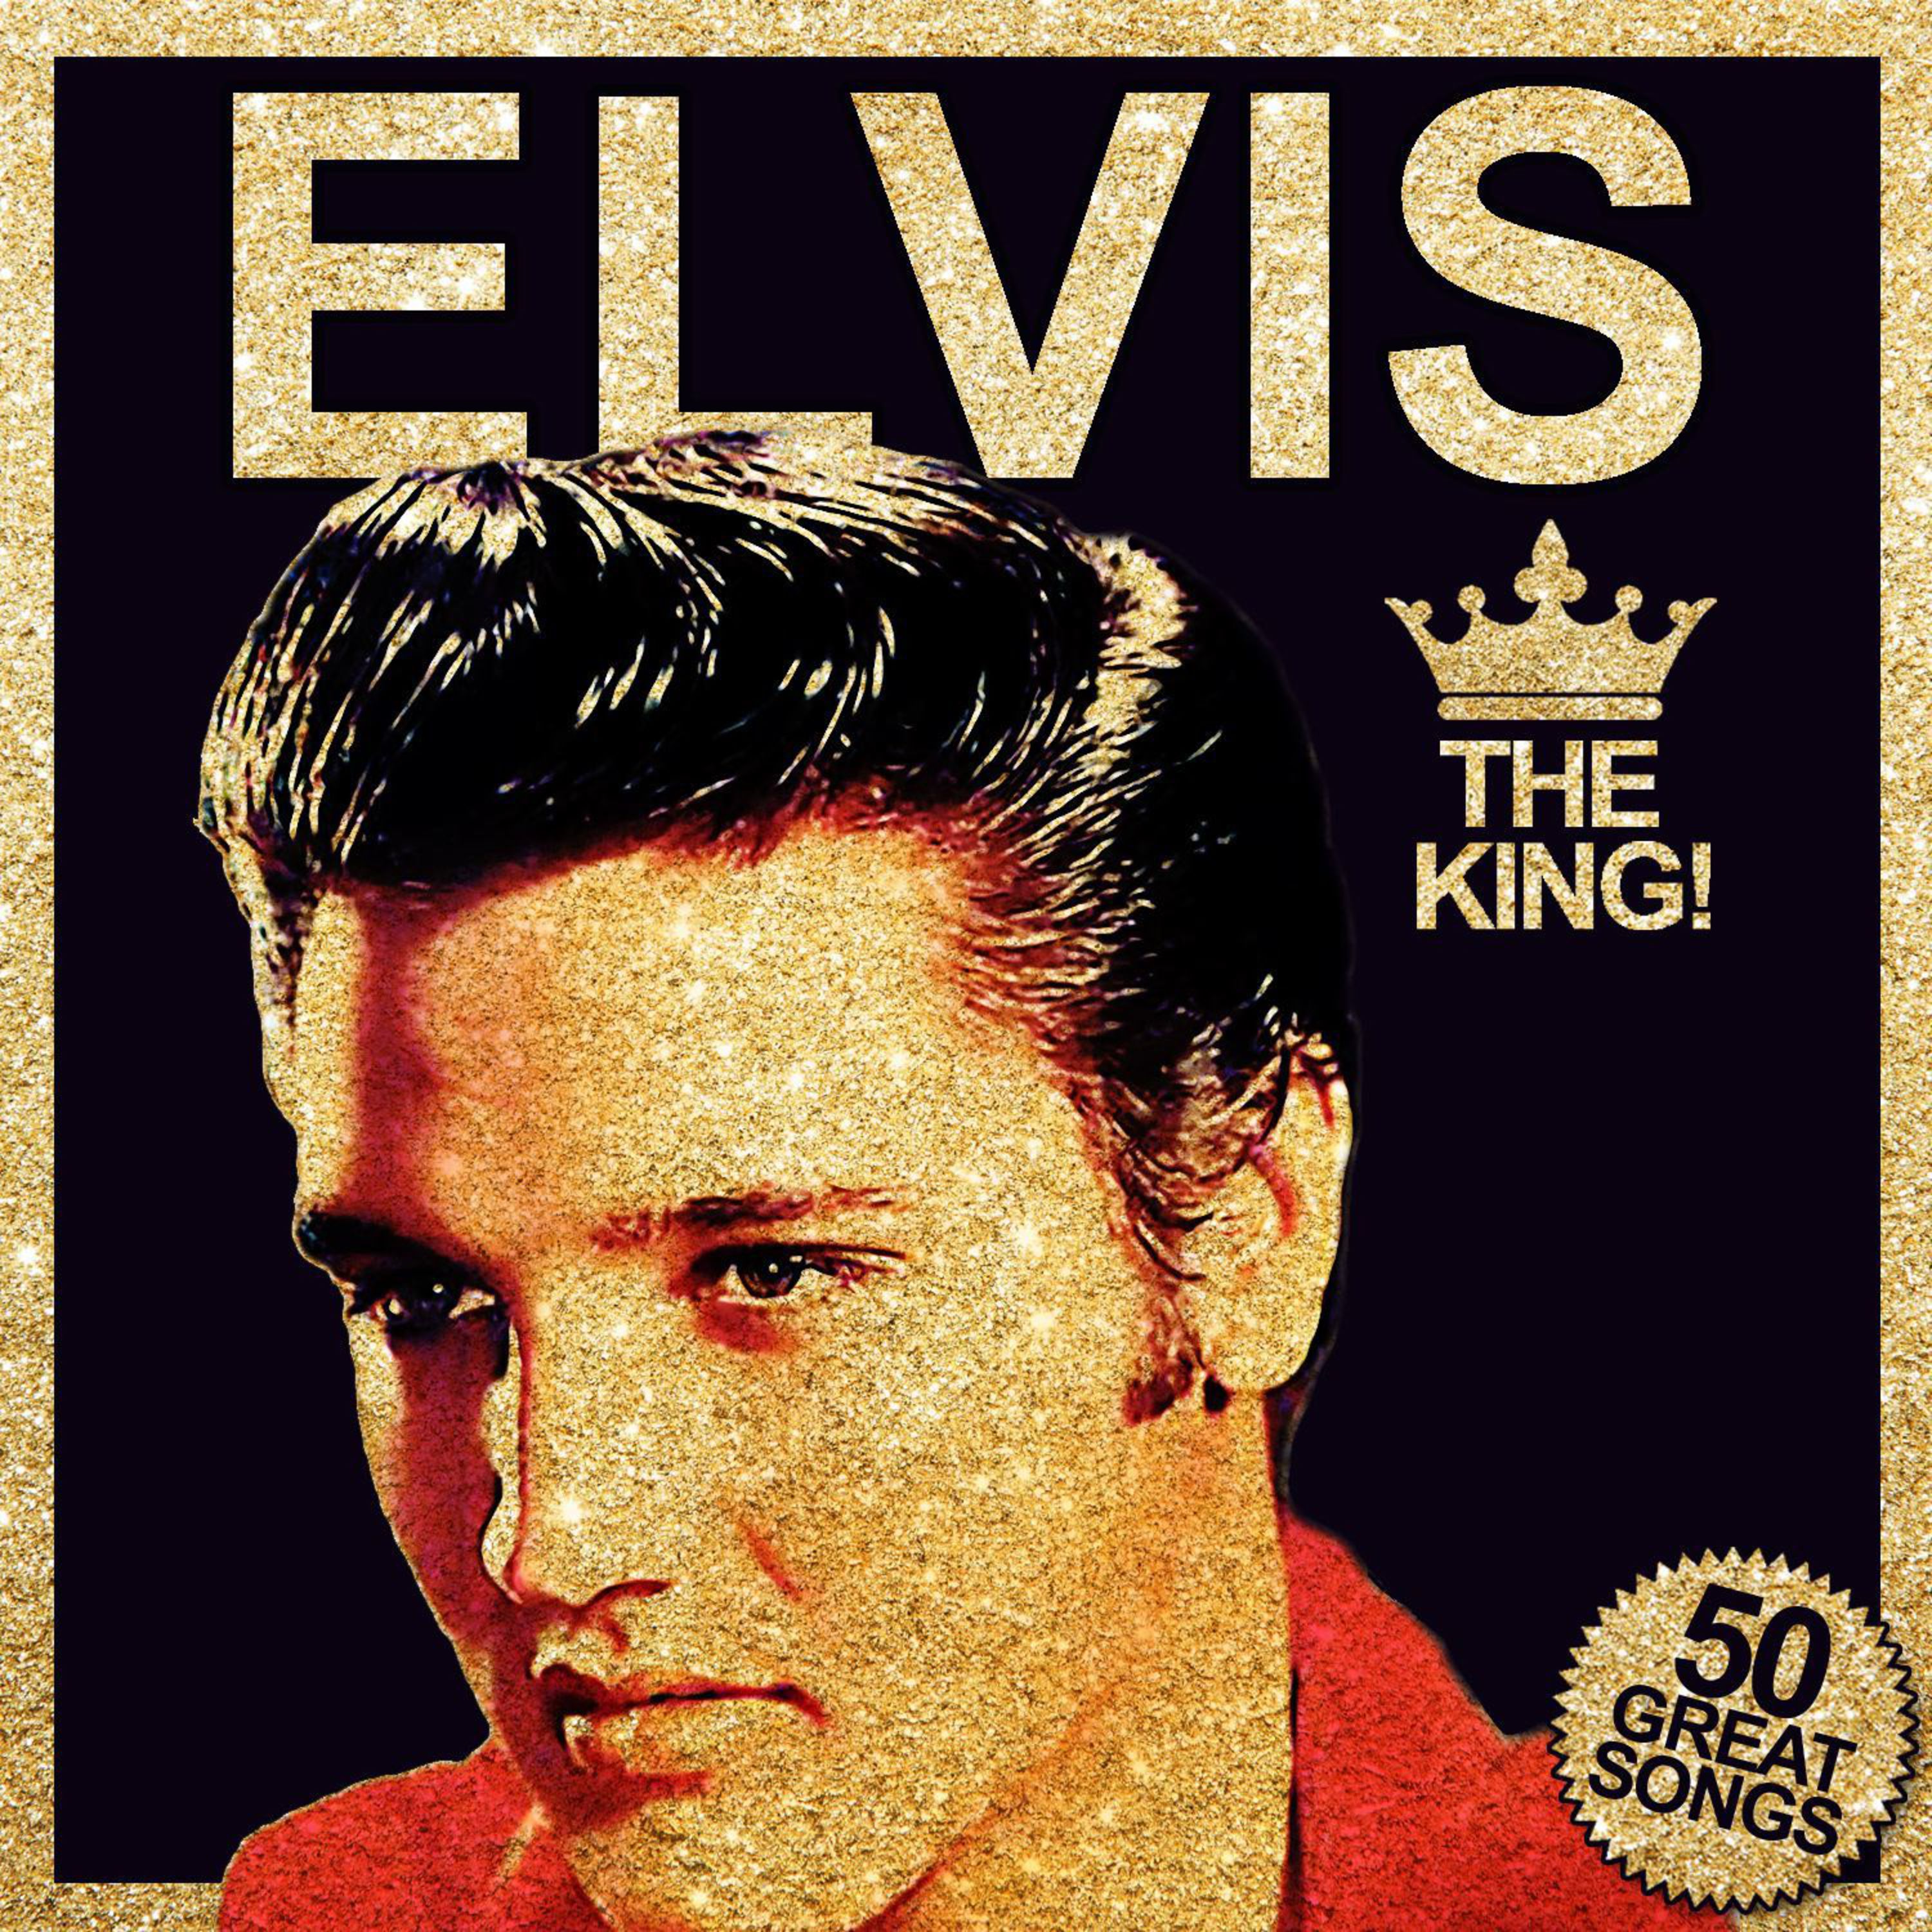 The King! (50 Great Songs)